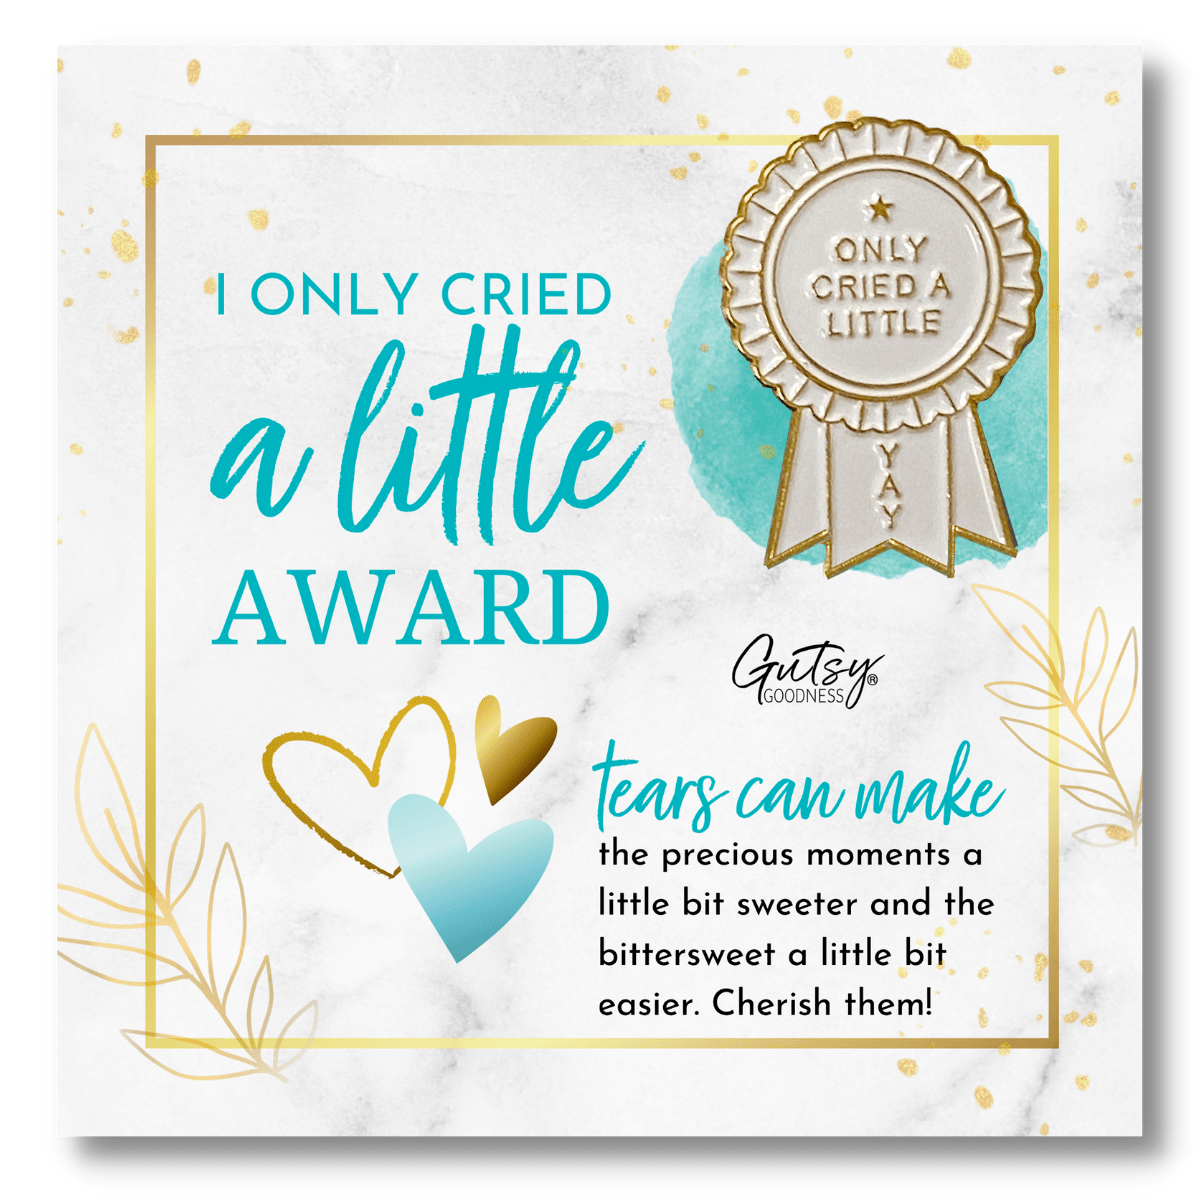 I Only Cried A Little Pin Special Occasion Wedding Shower Baby Shower Fun Novelty Enamel Pin  Pin - Gutsy Goodness Handmade Jewelry